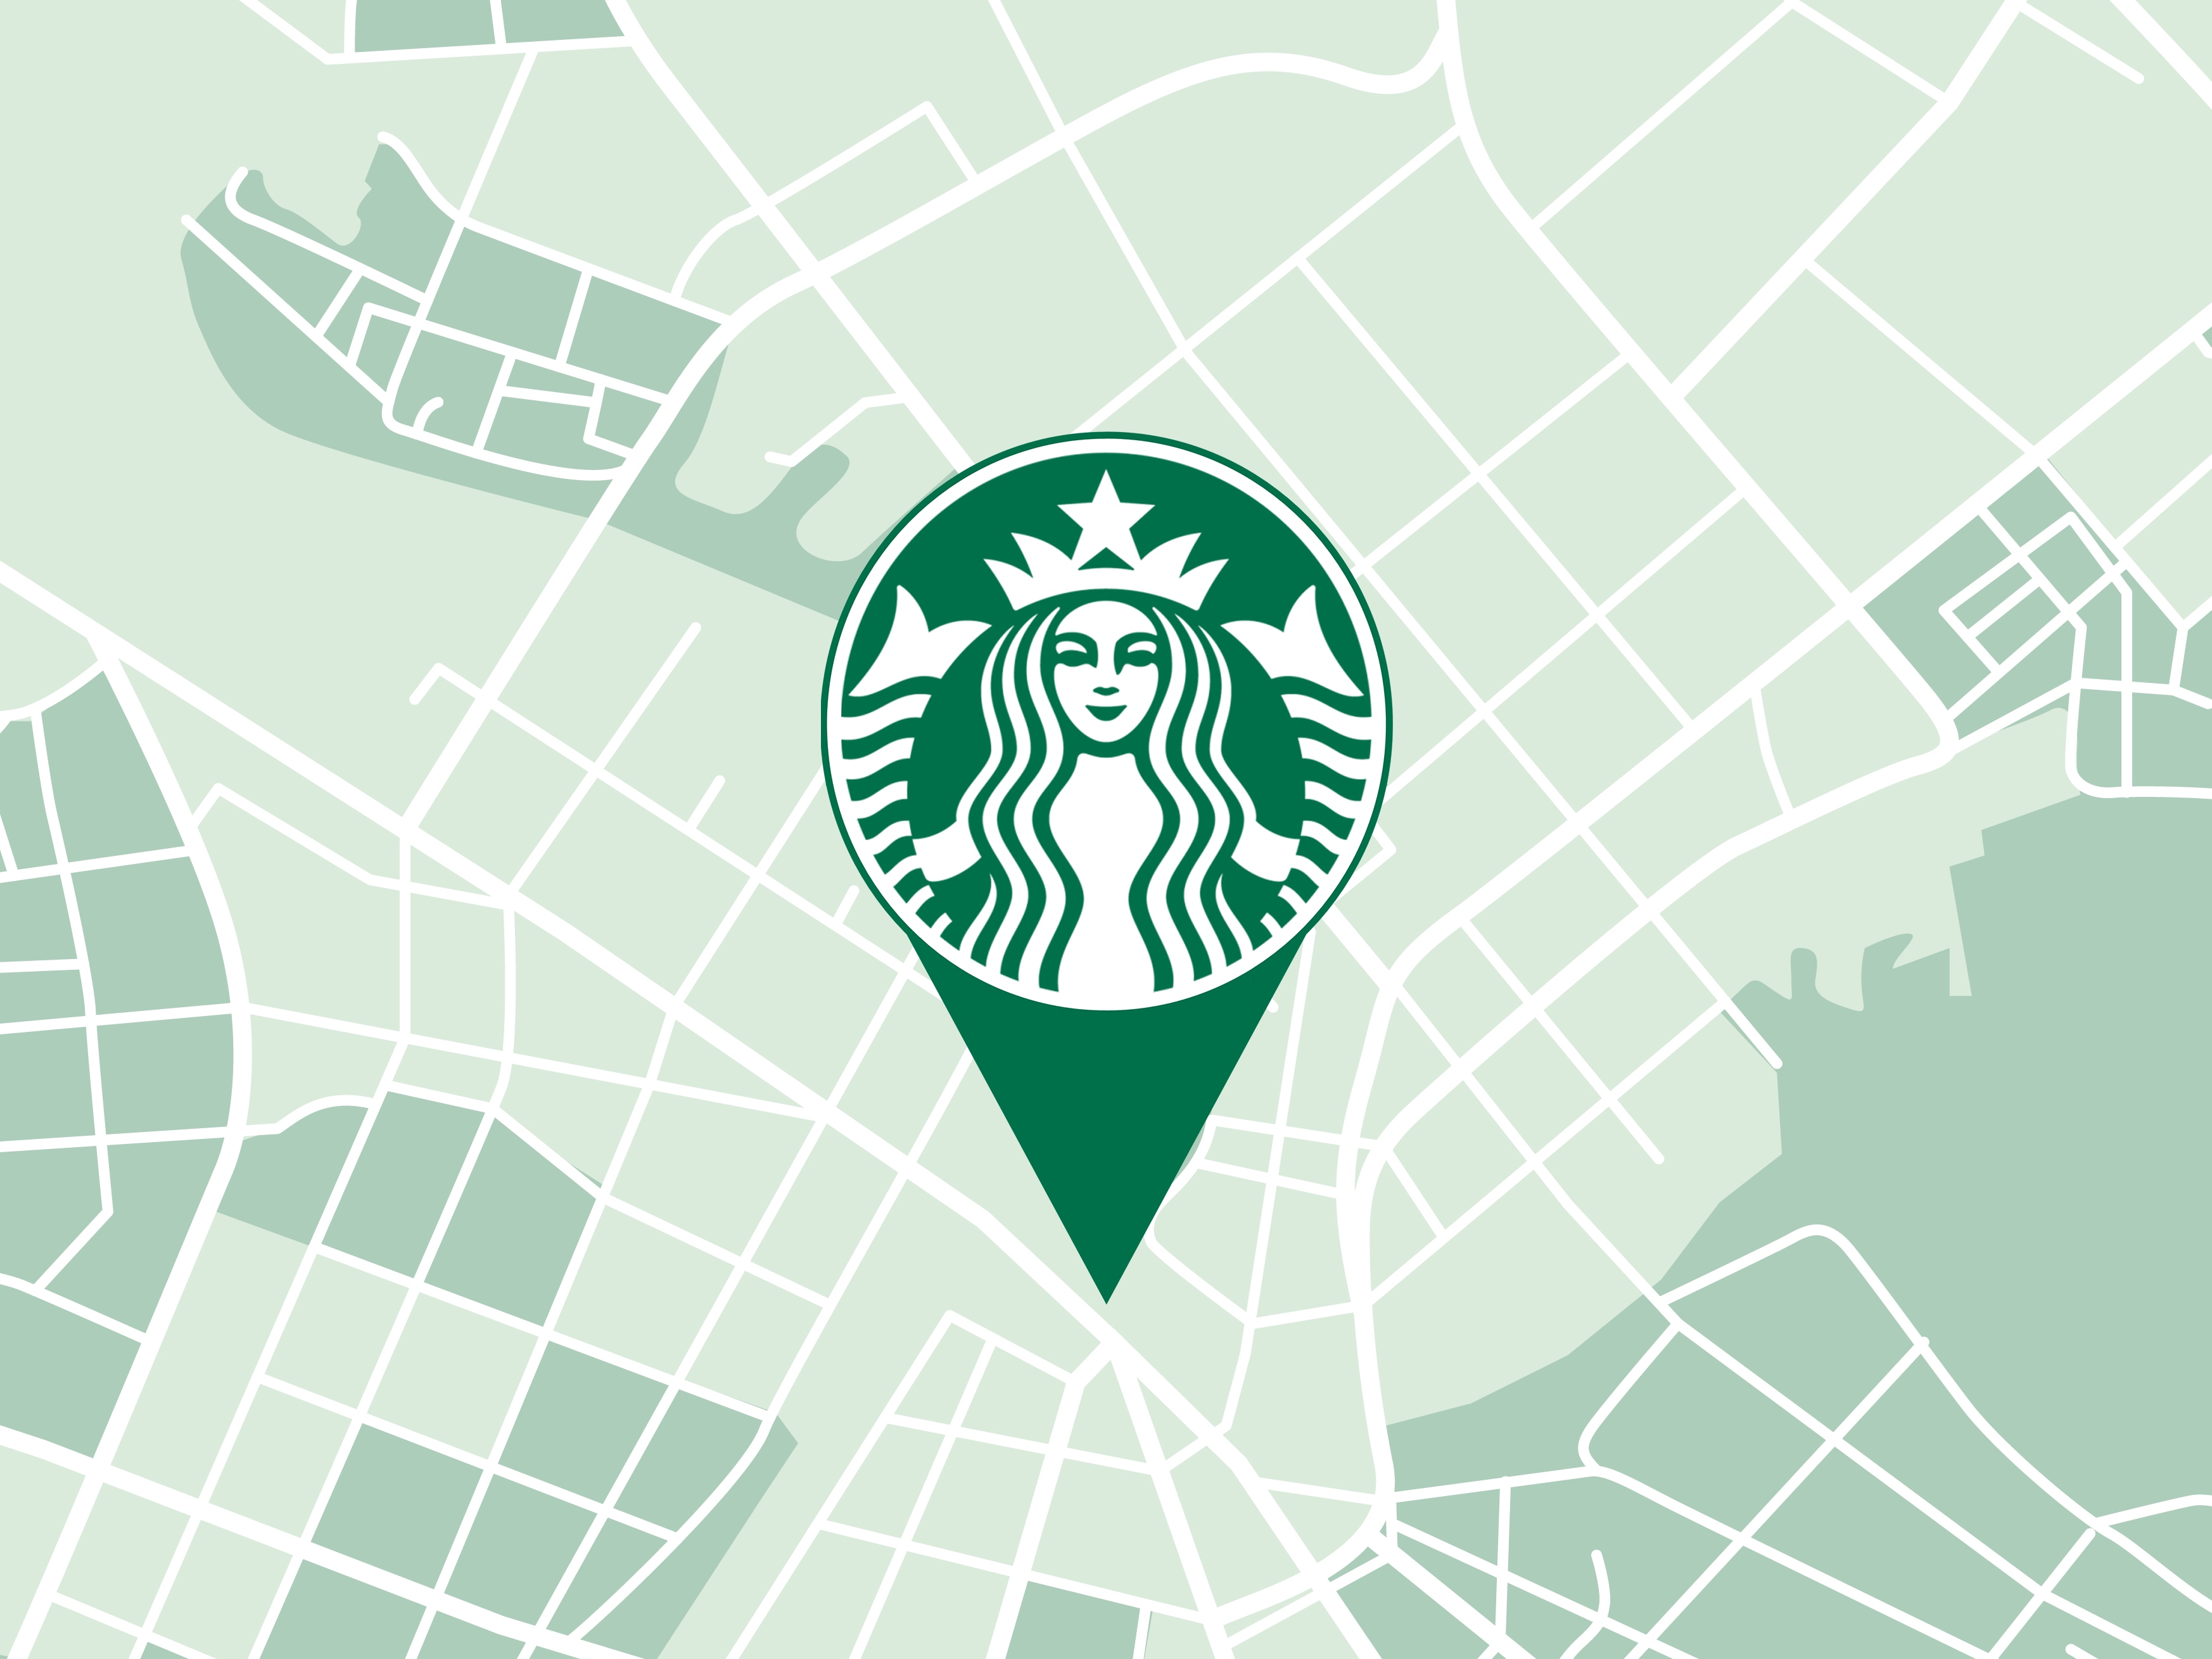 Generic map image with a Starbucks locator pin